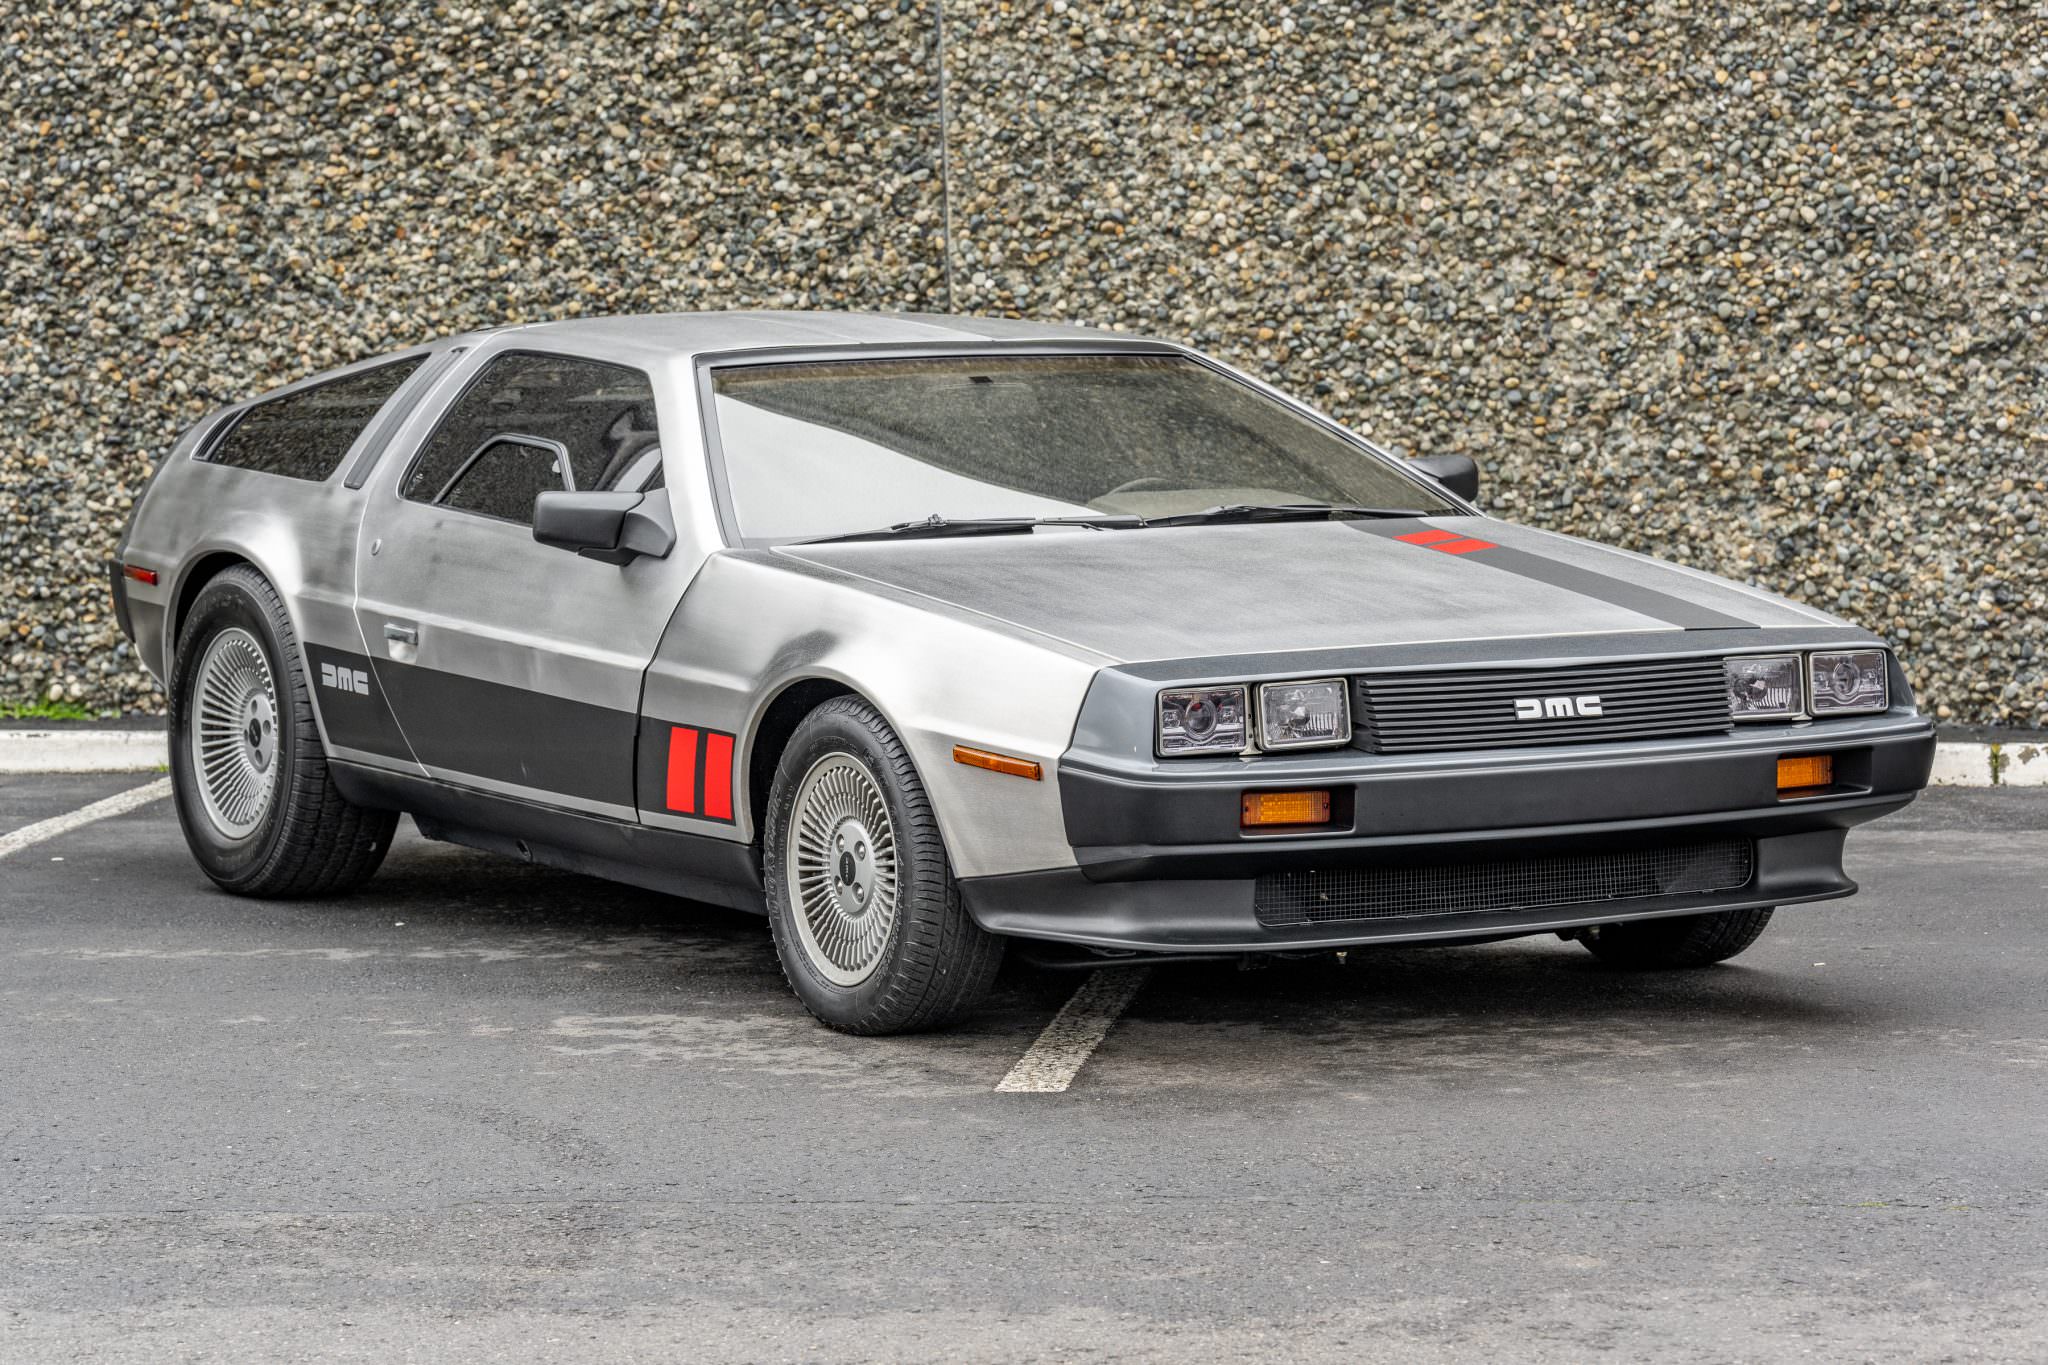 For Sale: DeLorean DMC-12 5-Speed – With The “Stage II” Engine Upgrade via @Silodrome